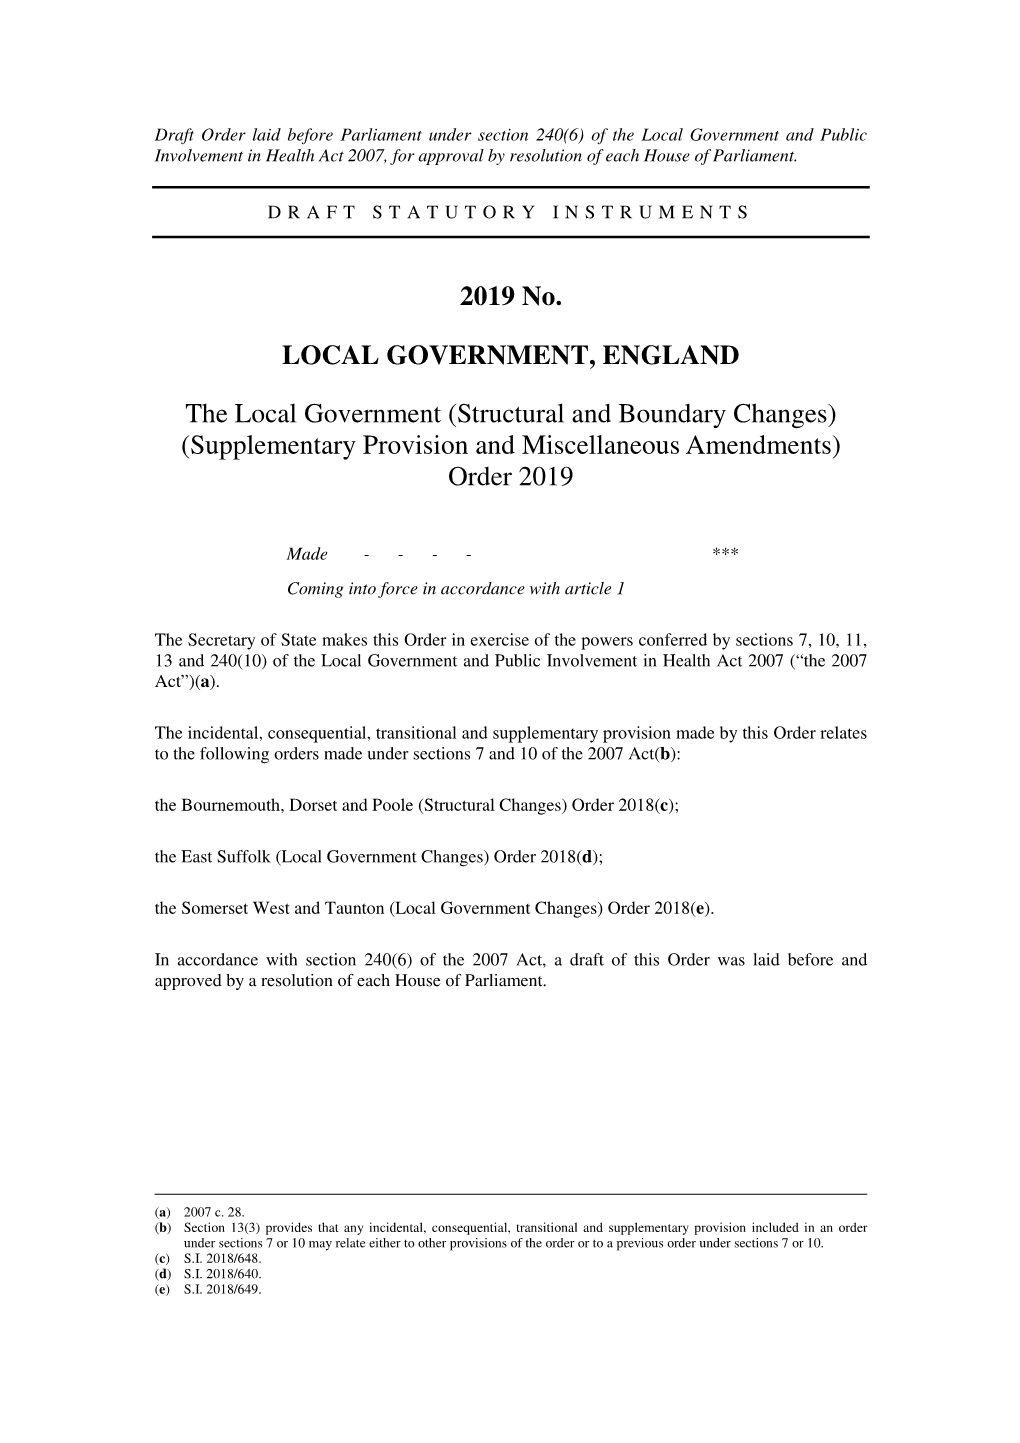 The Local Government (Structural and Boundary Changes) (Supplementary Provision and Miscellaneous Amendments) Order 2019